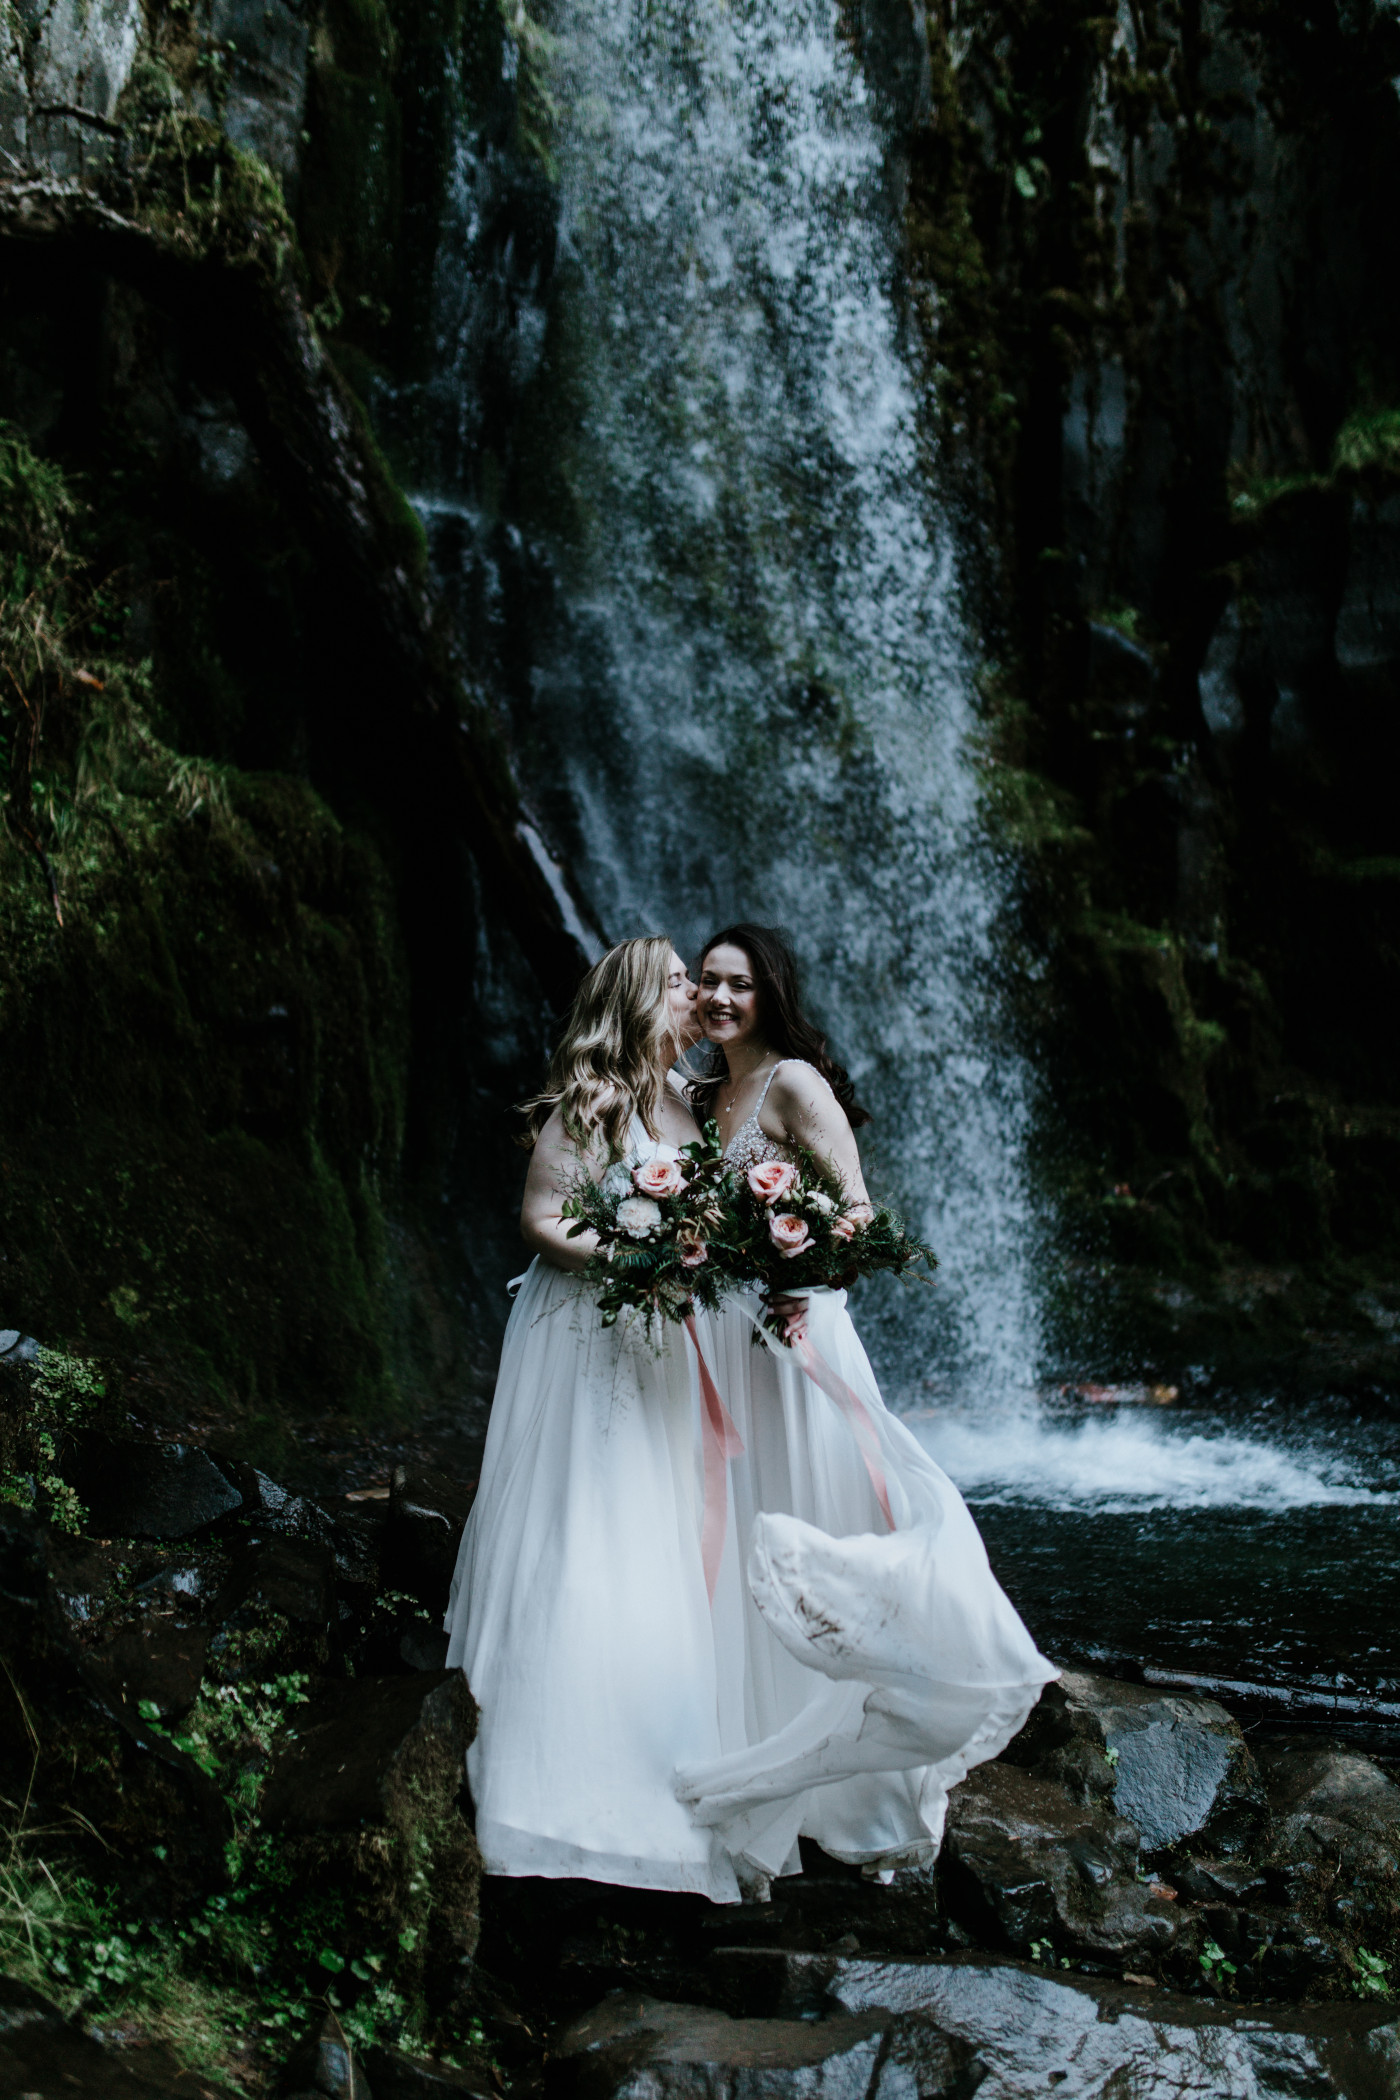 Tiffany gives Hayley a kiss. Elopement photography at the Columbia River Gorge by Sienna Plus Josh.